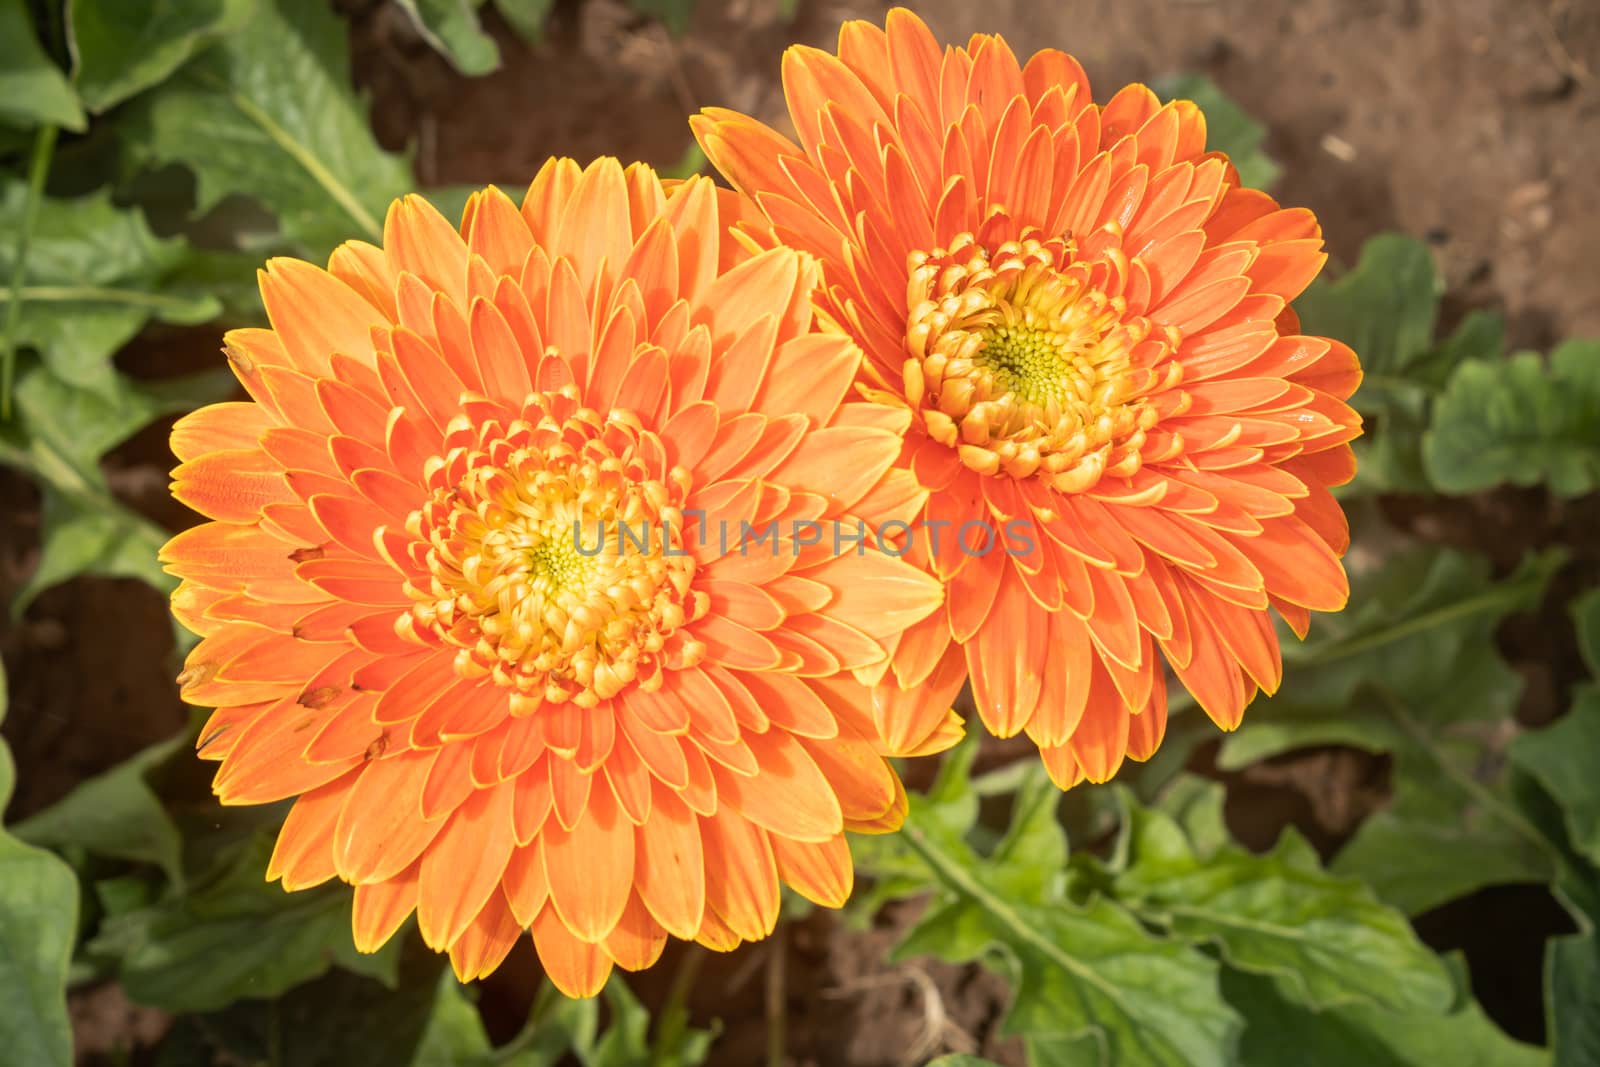 Orange Gerbera Daisy or Gerbera Flower in Garden with Natural Light on Green Leaves Background